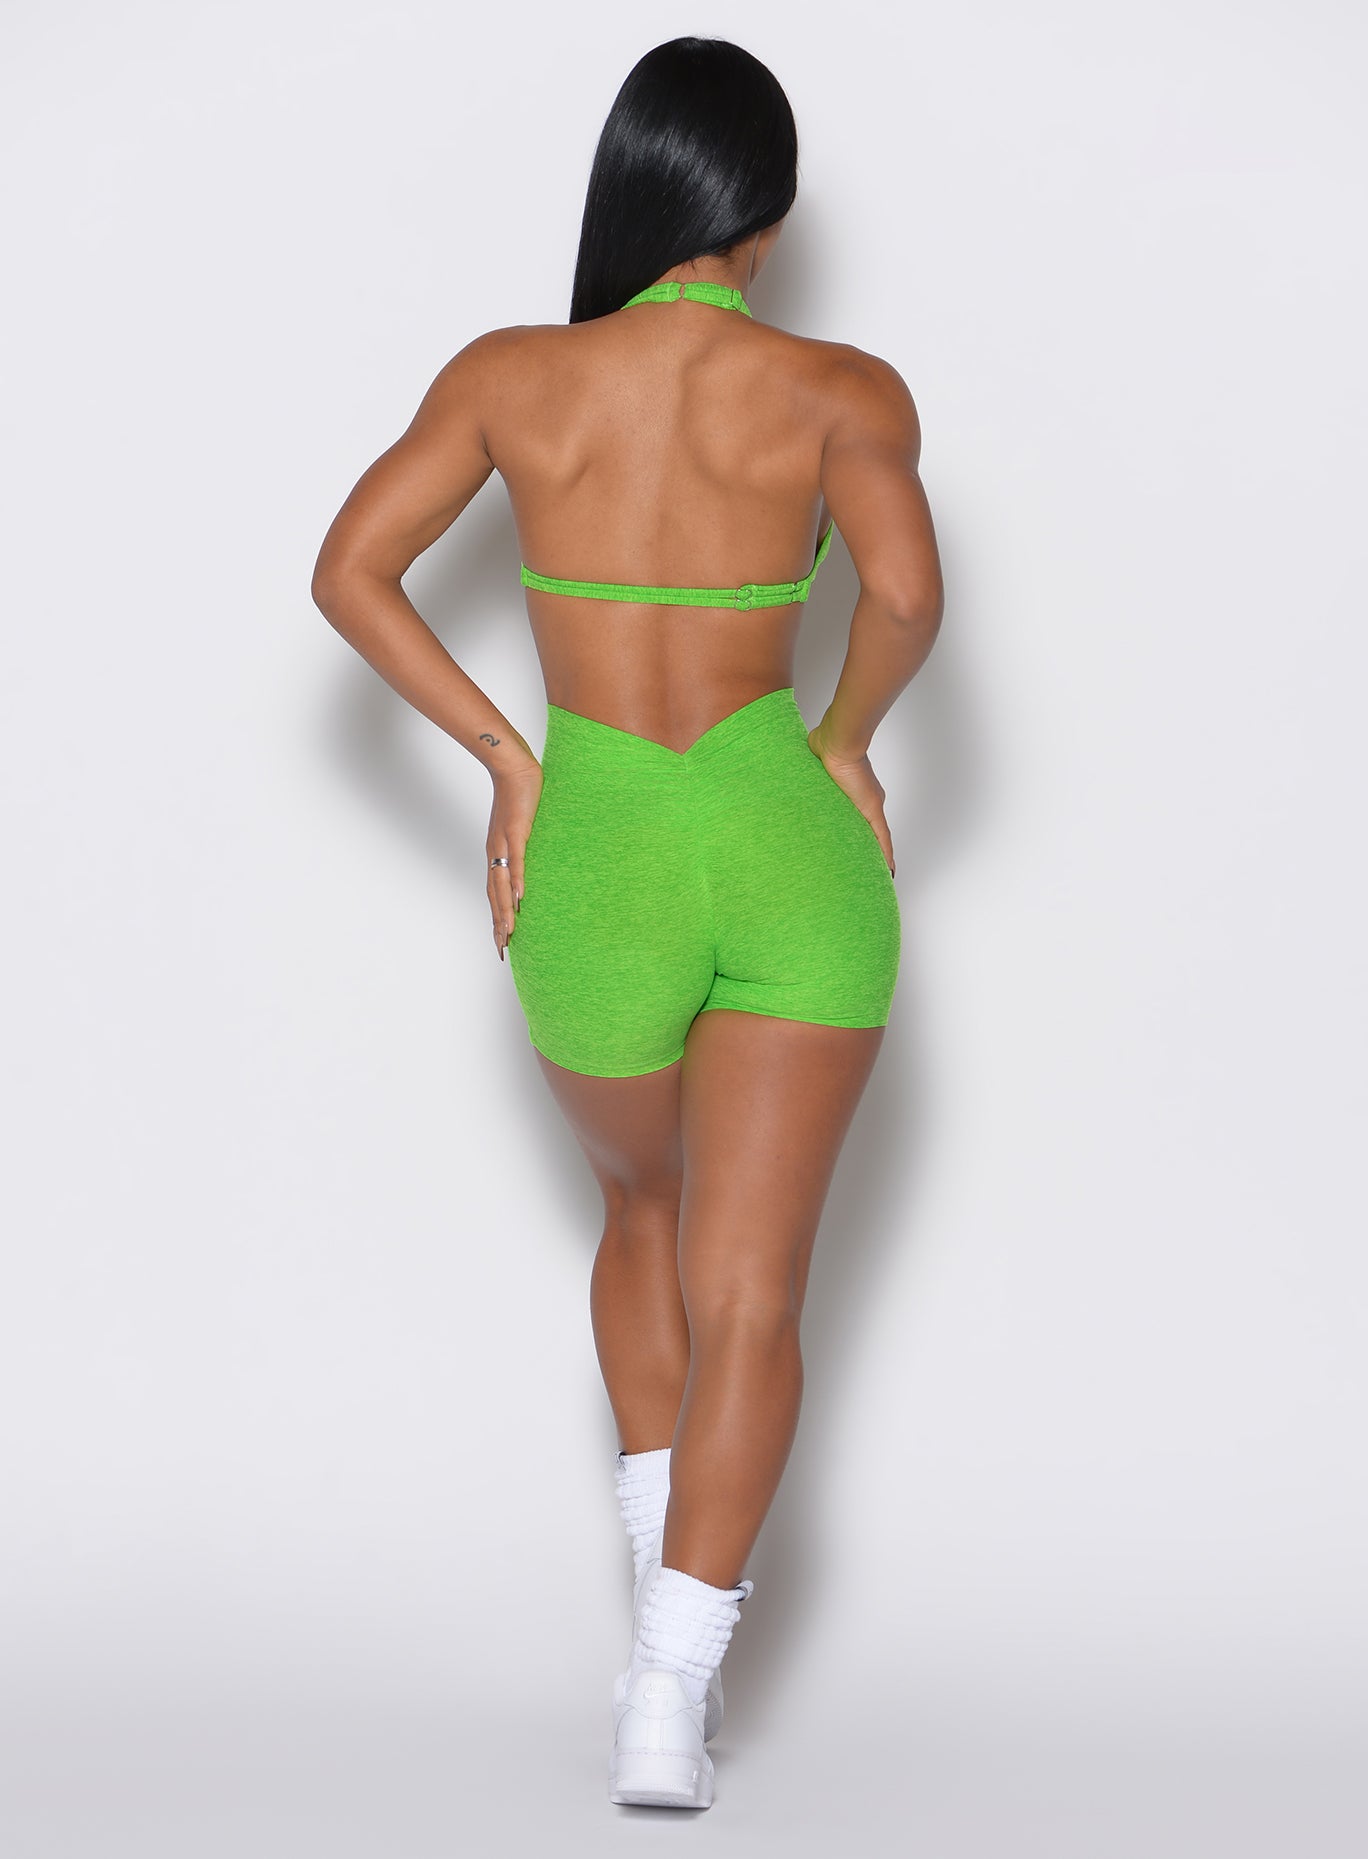 back profile view of a model wearing our V back shorts in Neon Lime Green color along with the matching bra 